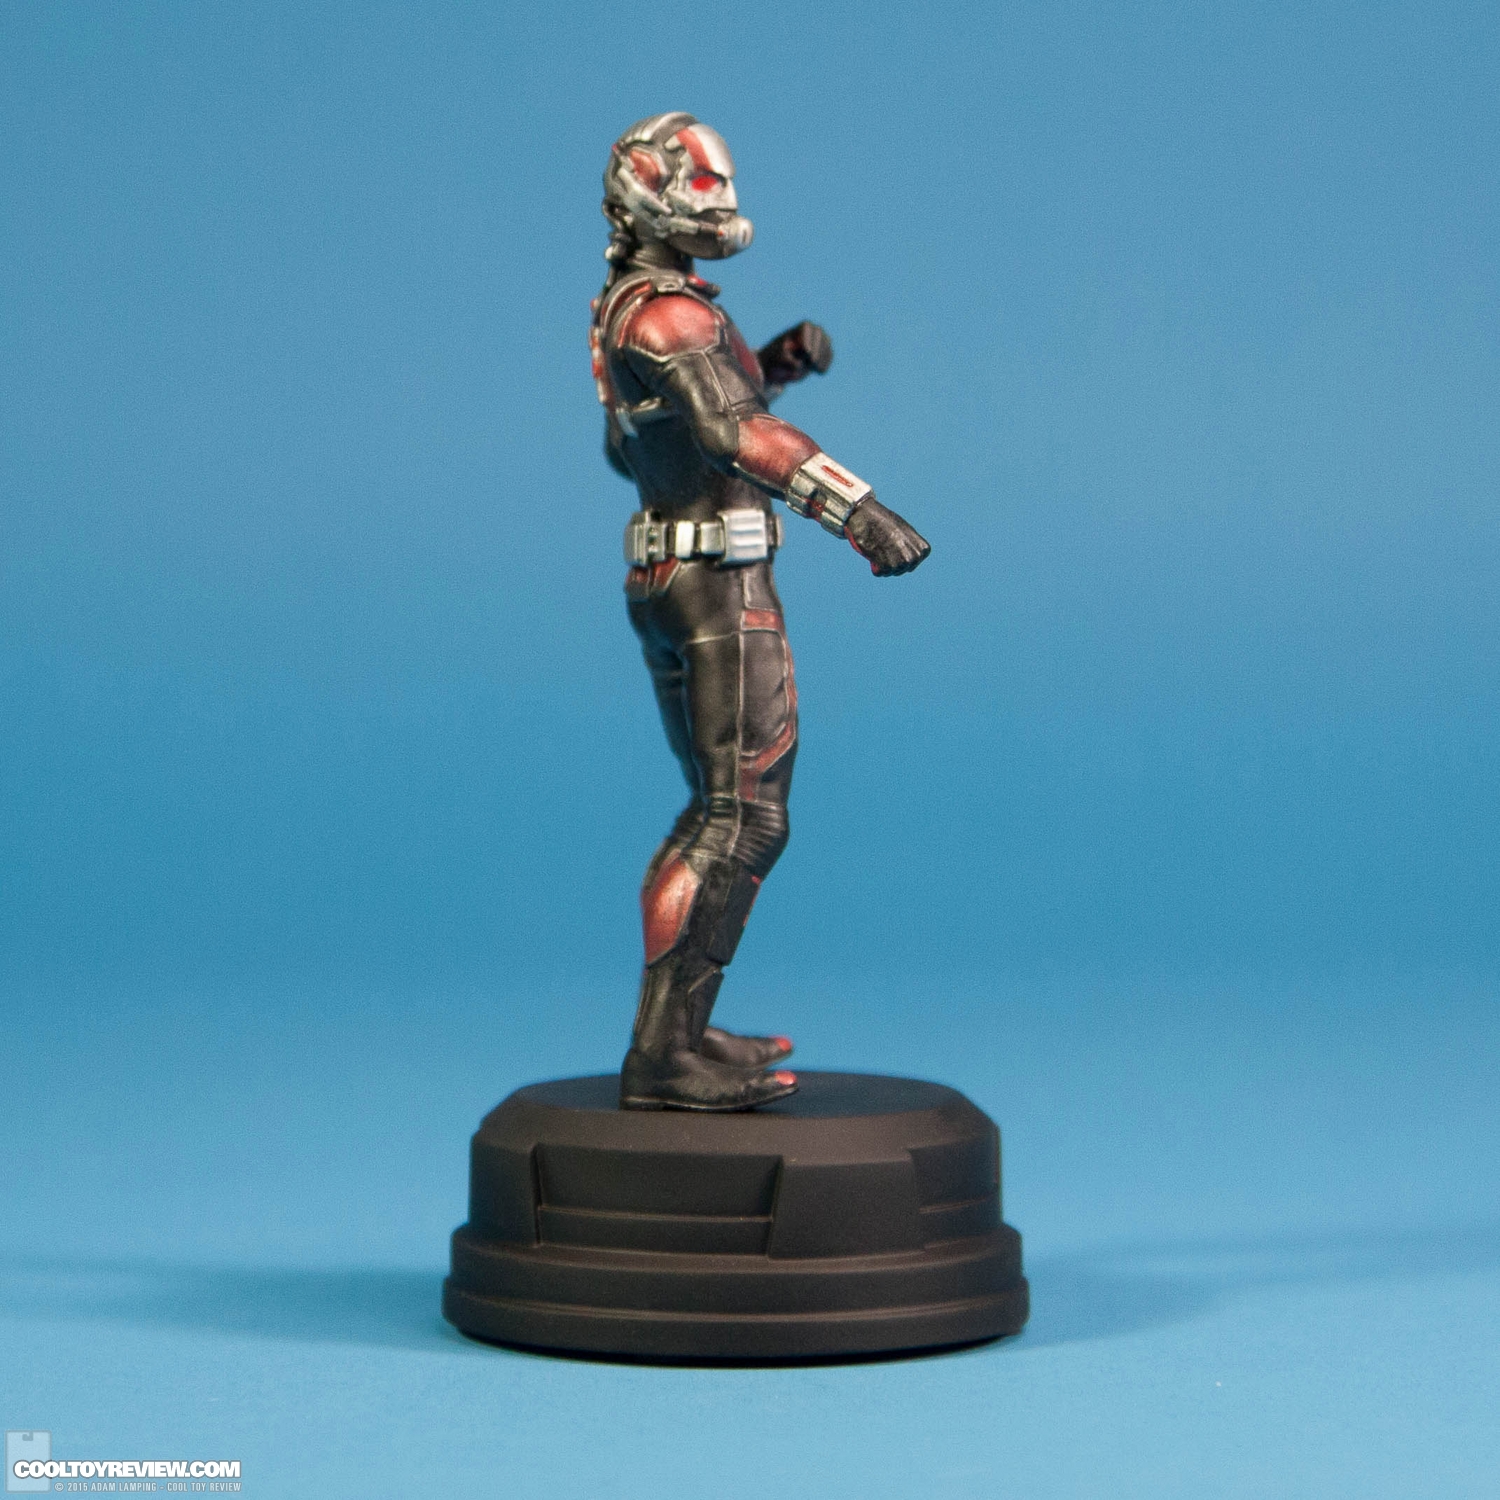 gentle-giant-ant-man-statue-2015-convention-exclusive-002.jpg